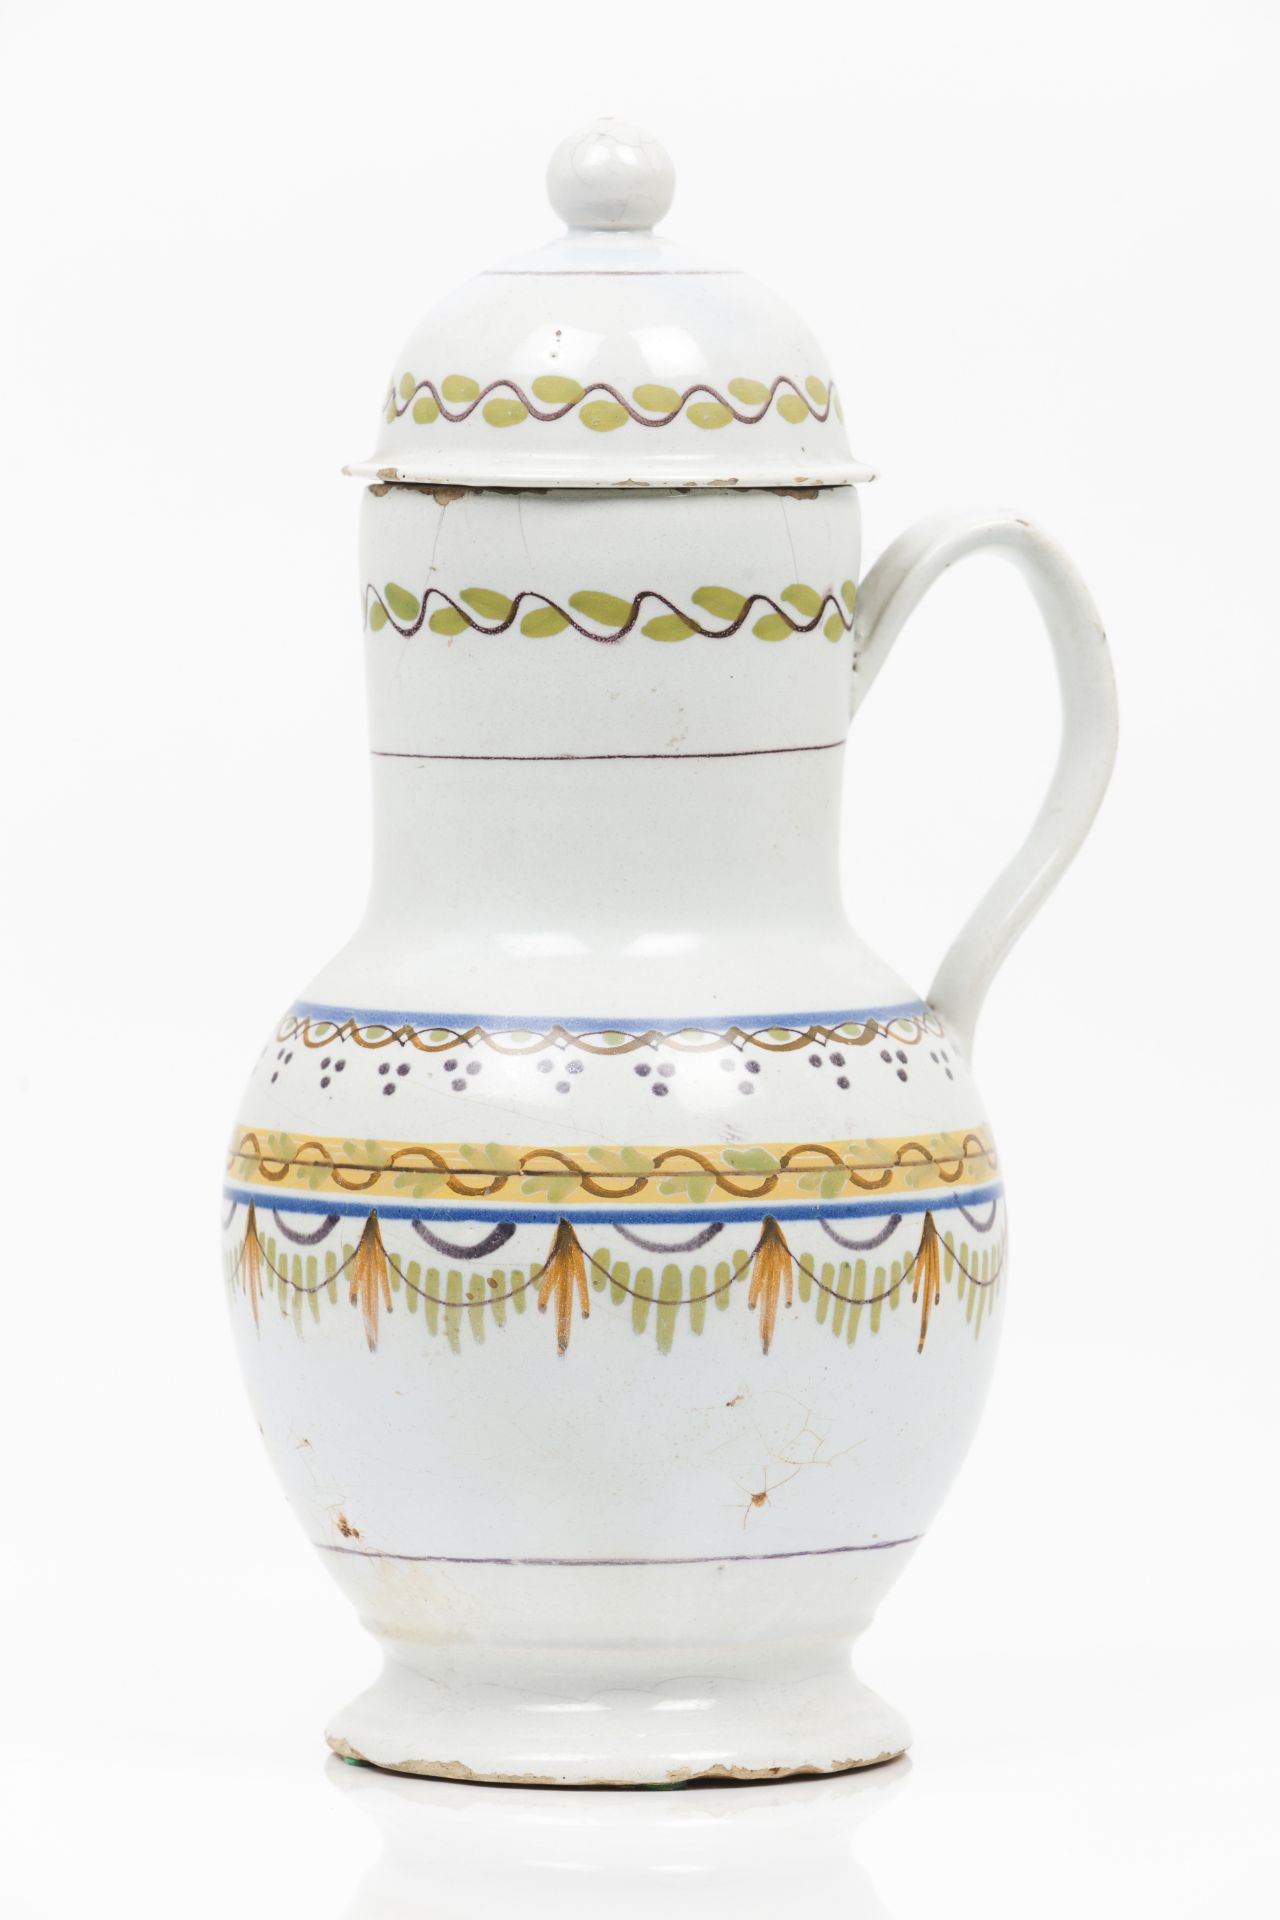 A mug with coverPortuguese faience Polychrome decoration "Miragaia" factory - Rocha Soares (